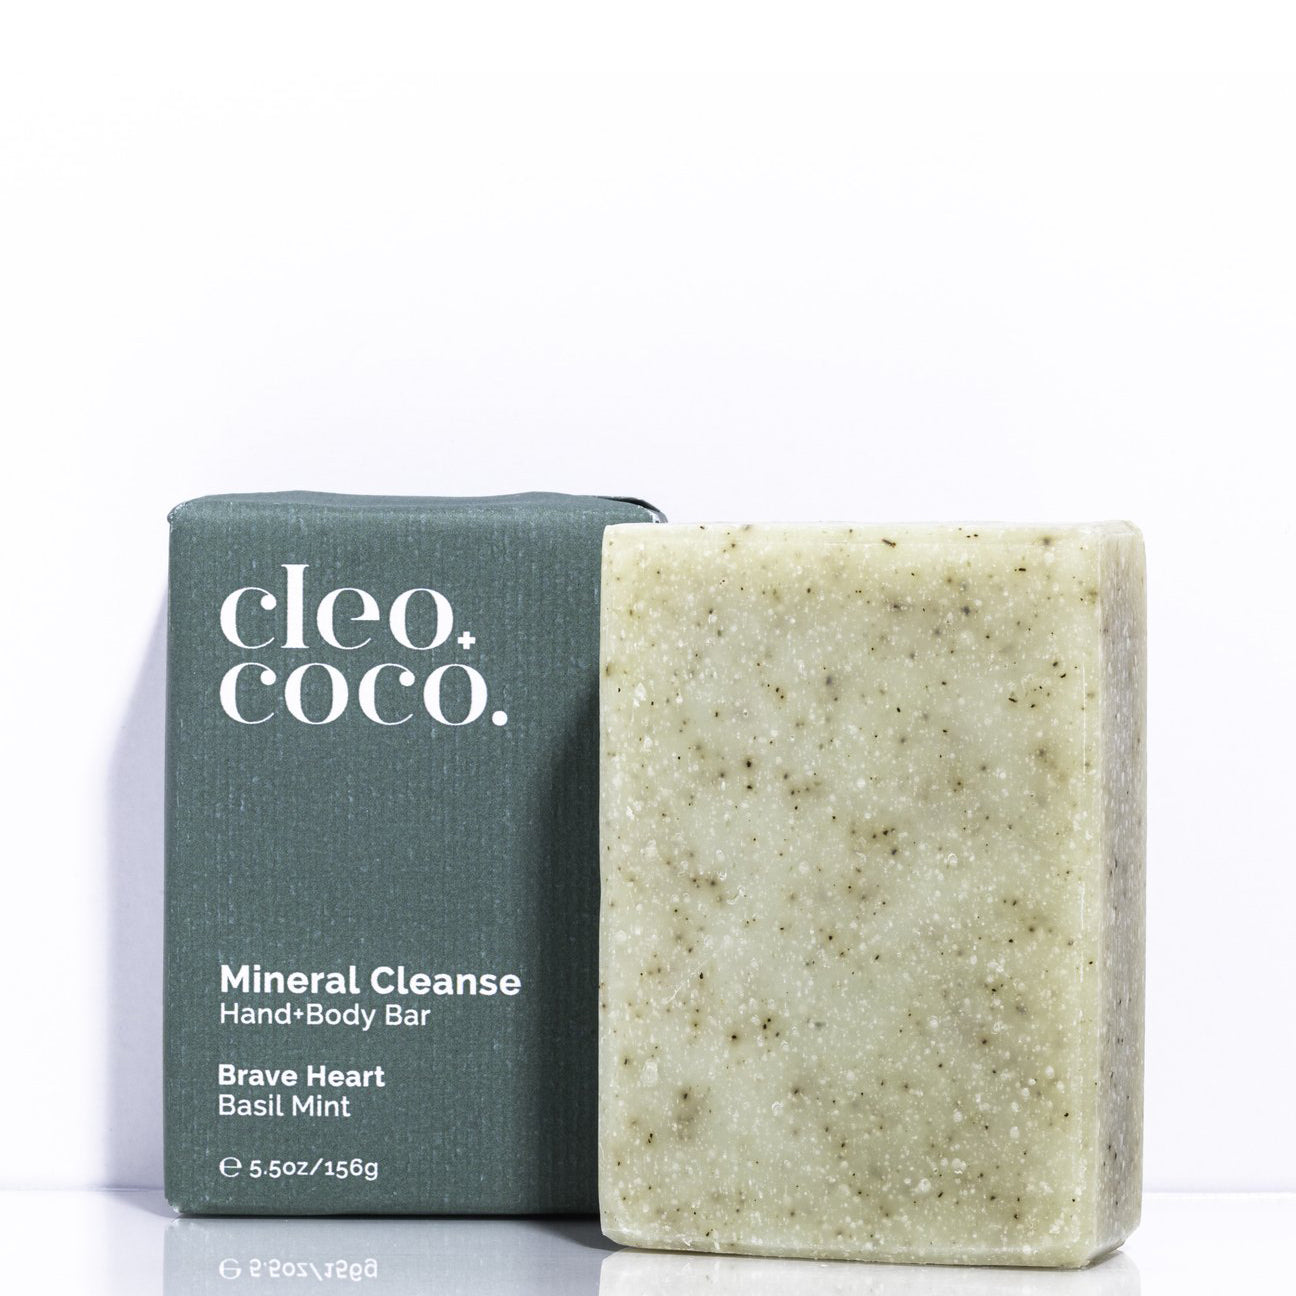 Mineral Cleanse Hand + Body Bar